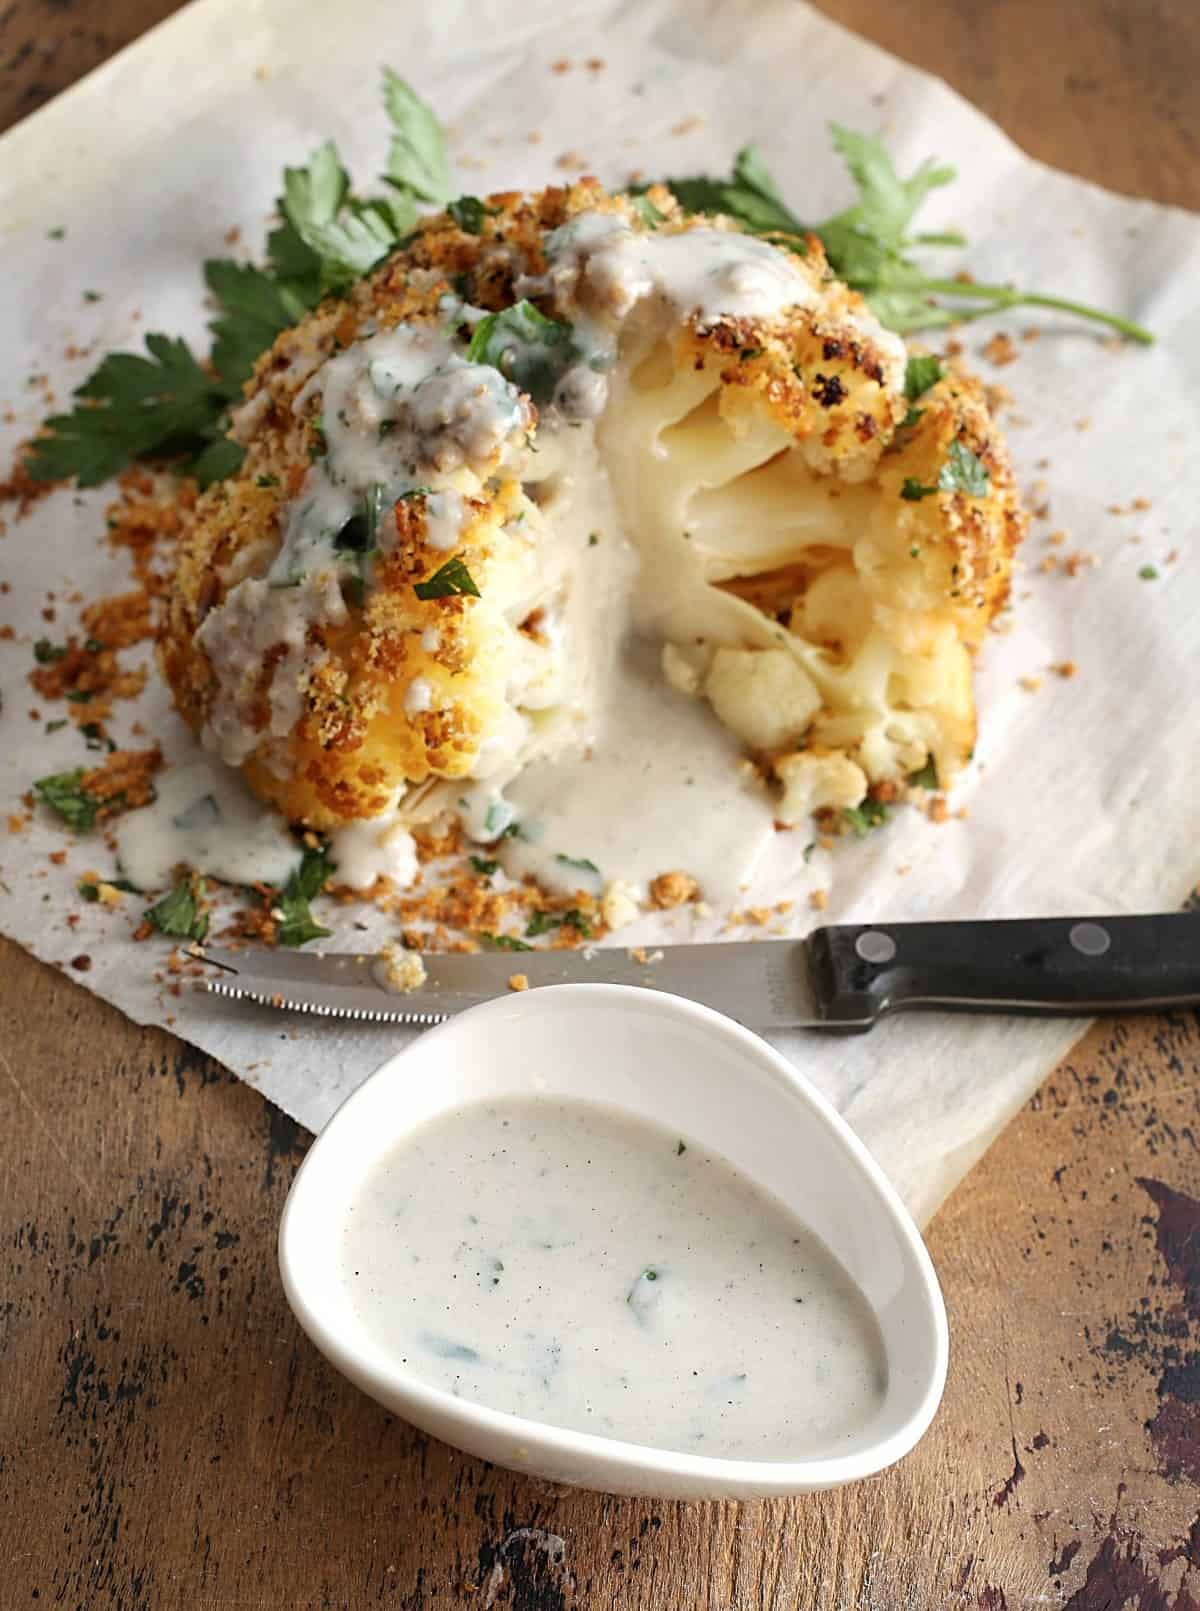 Showing a cut roasted cauliflower with a bowl of Parmesan Cheese sauce and a knife.